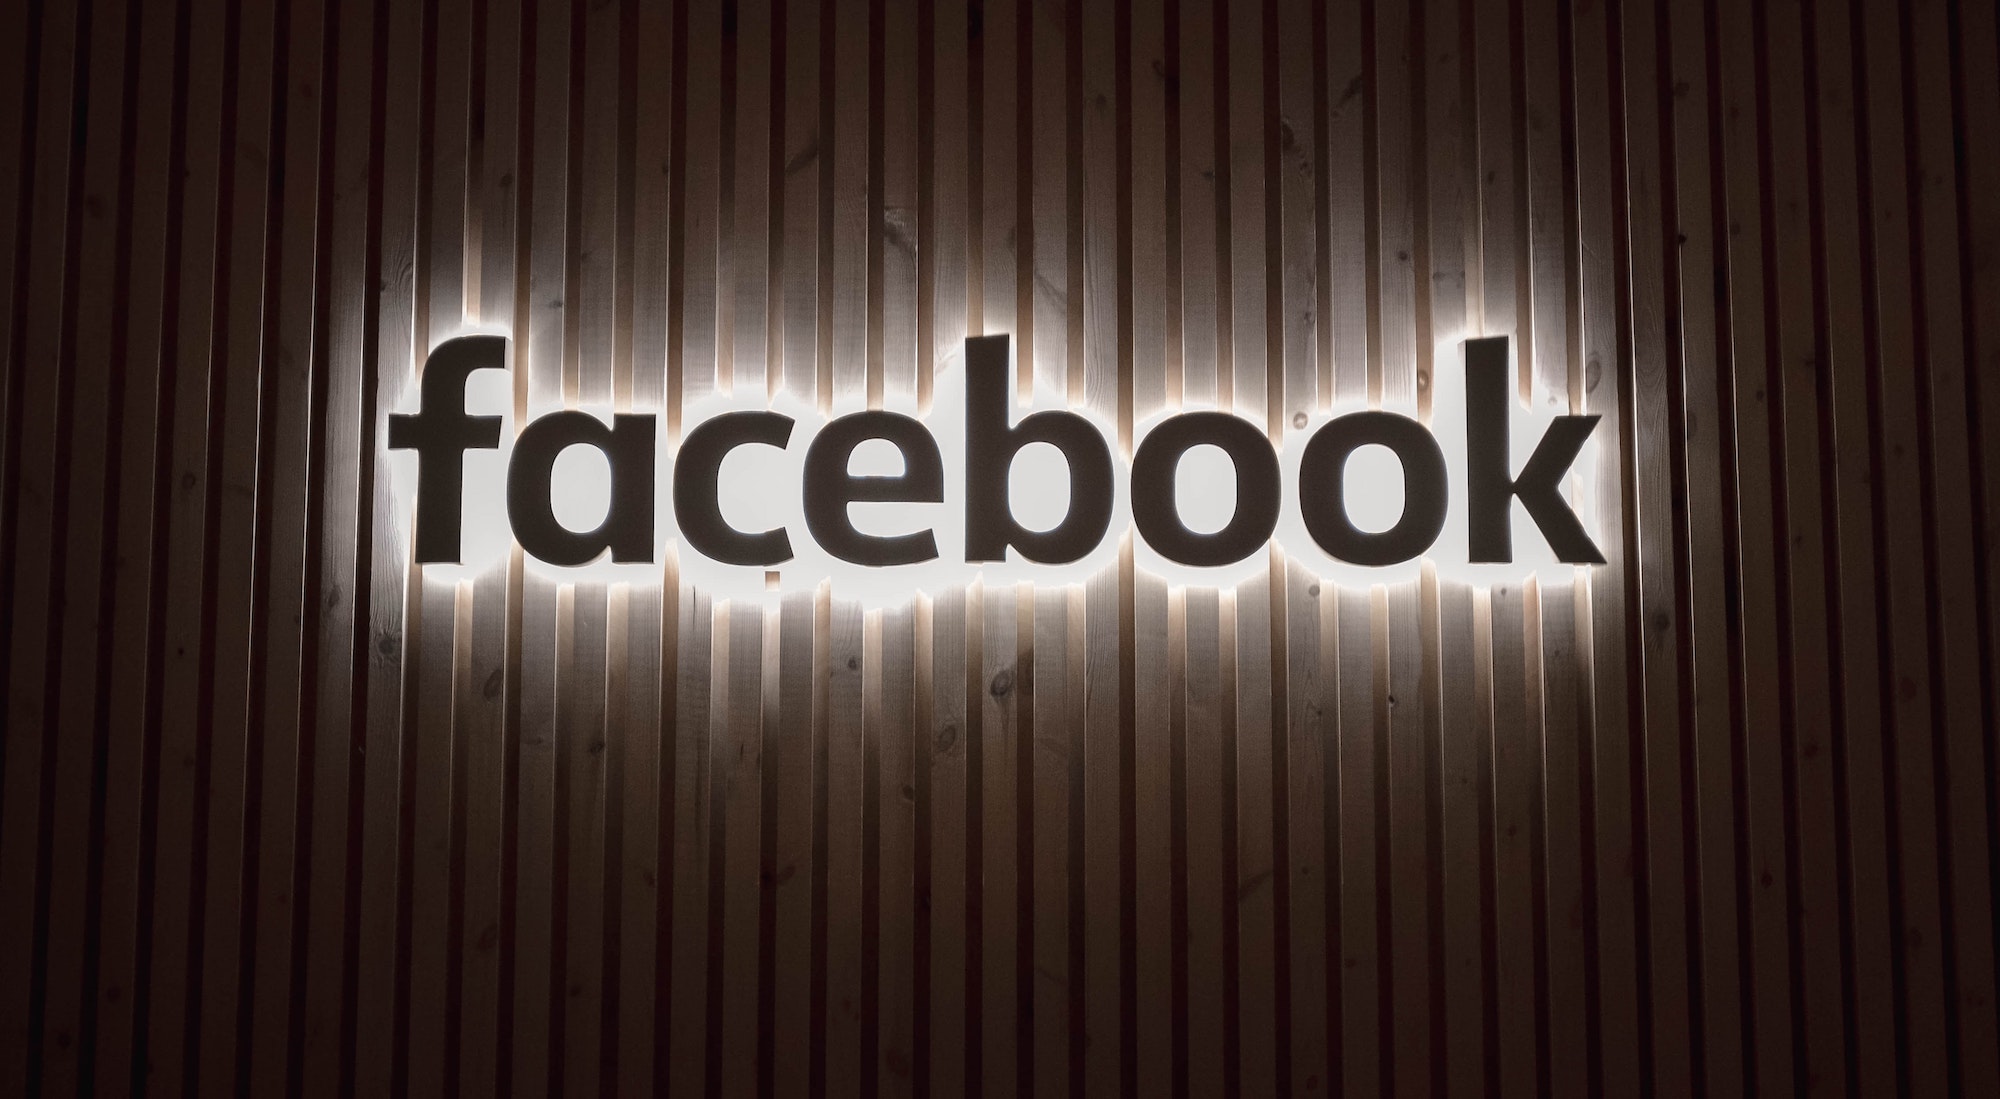 Facebook might rebrand as a ‘metaverse’ company. What does that even mean?